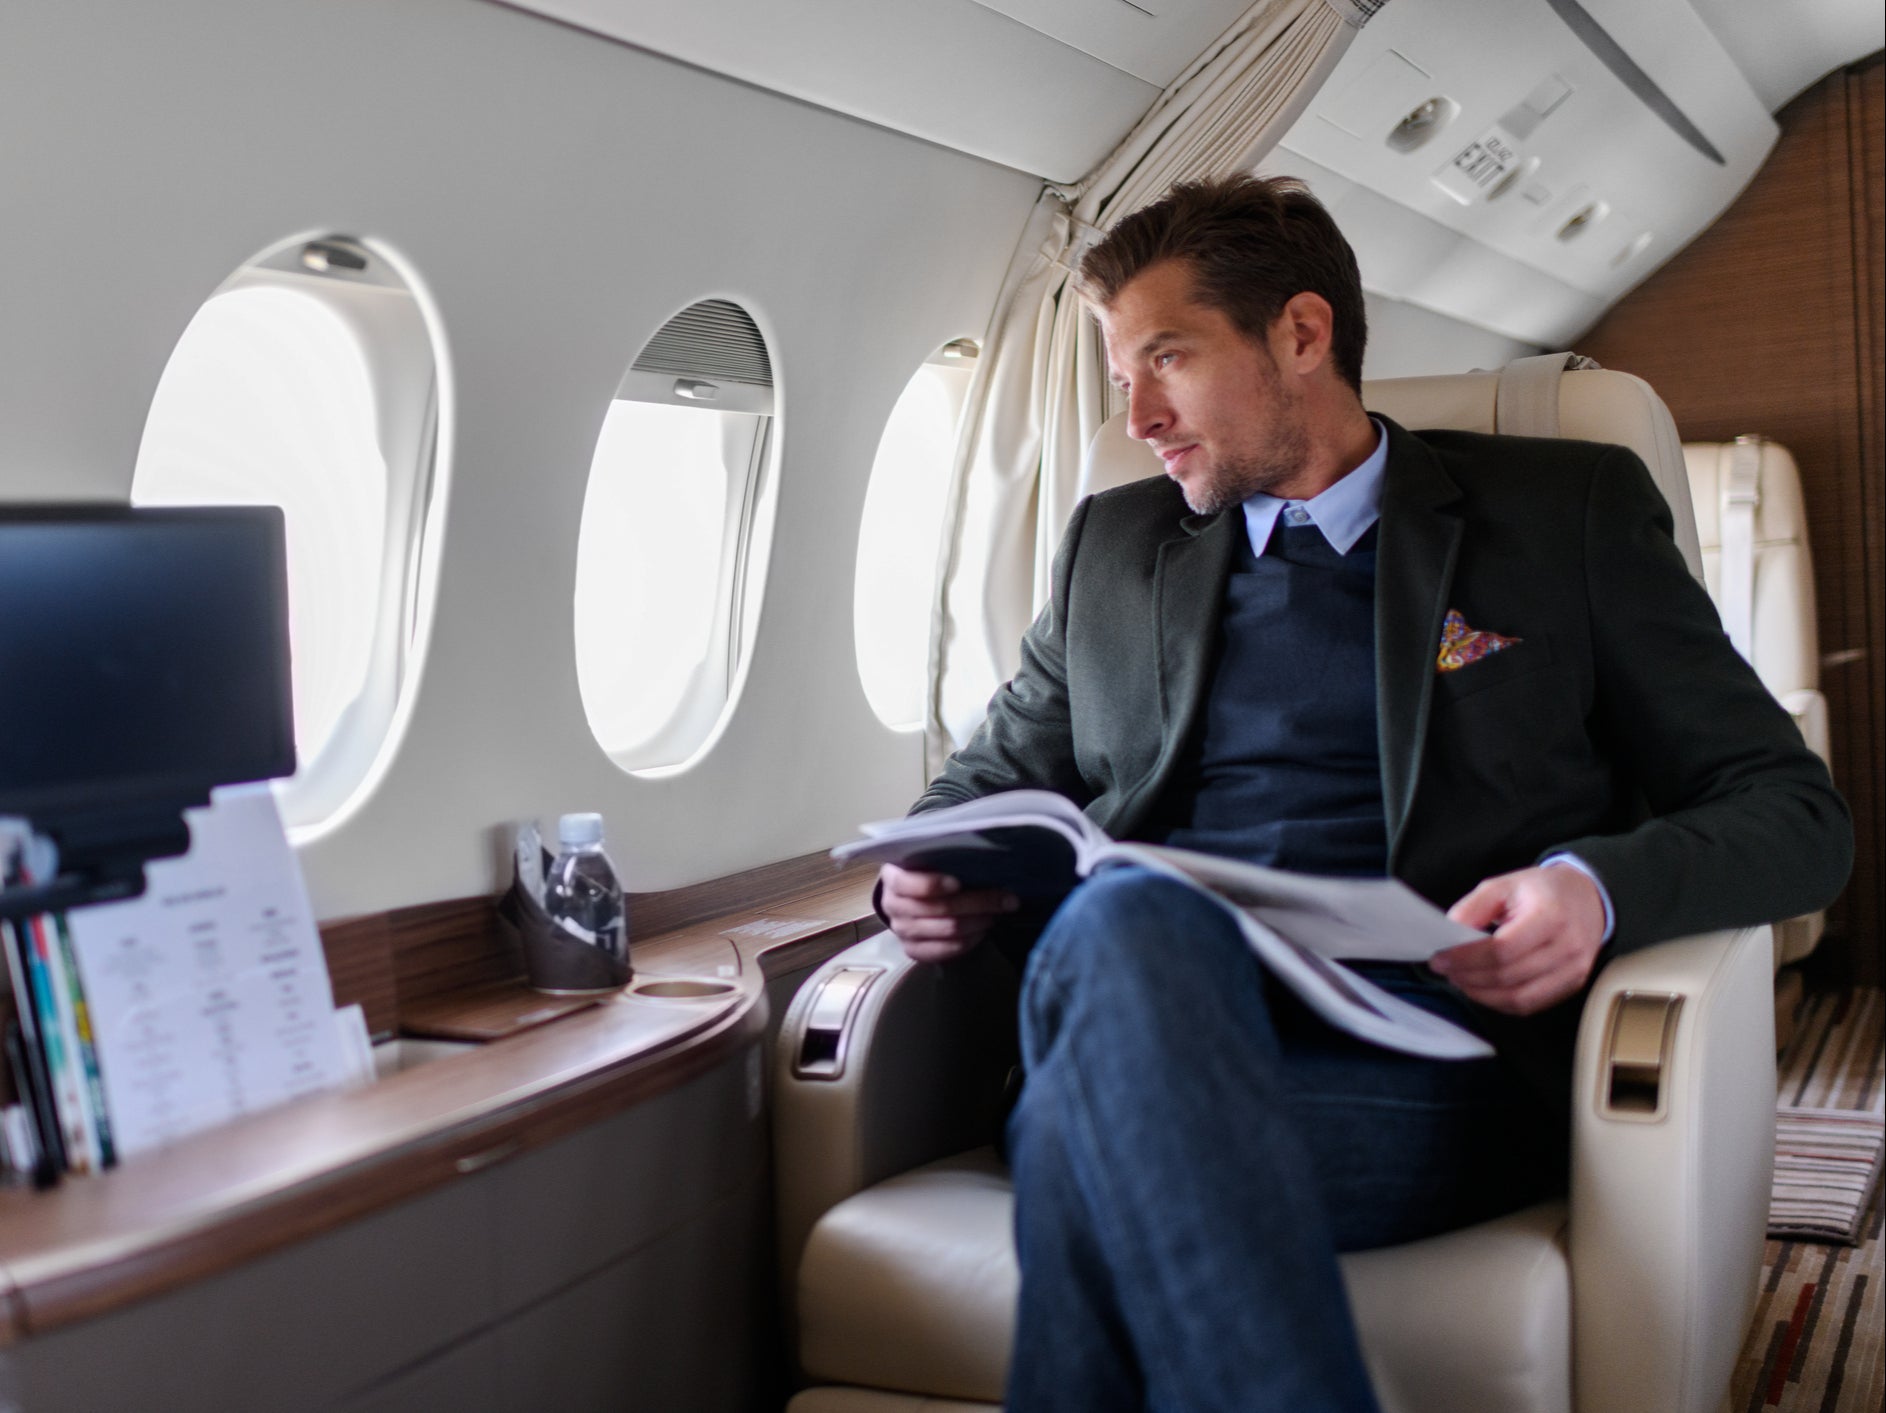 The rich have been heavily criticised for their use of private jets